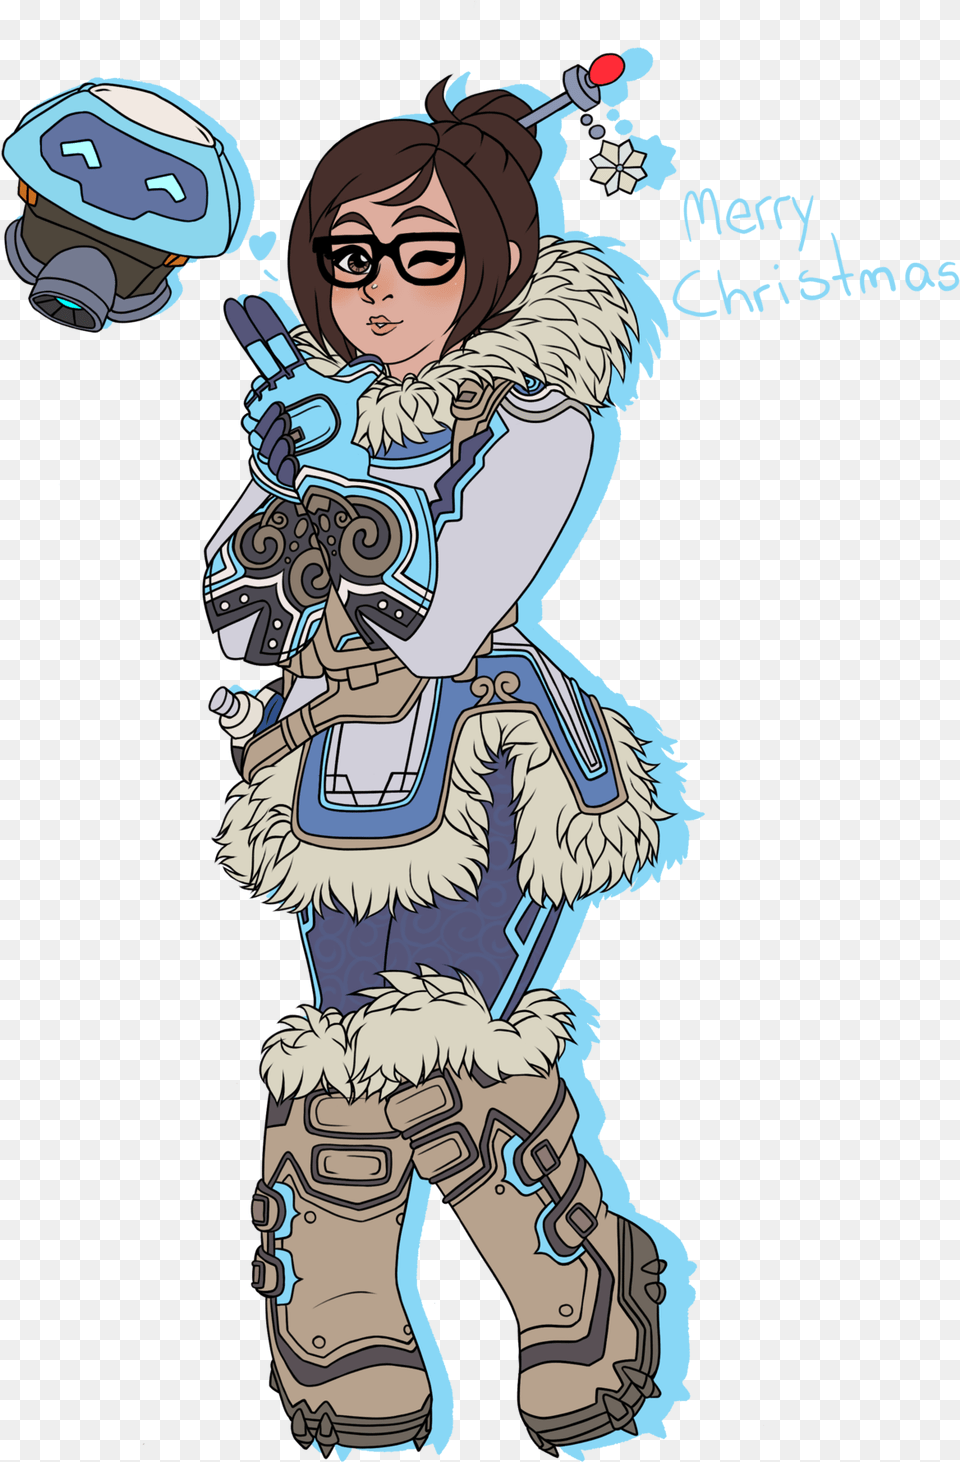 Mei Overwatch By Cillias Mei Overwatch Transparent, Publication, Book, Comics, Person Png